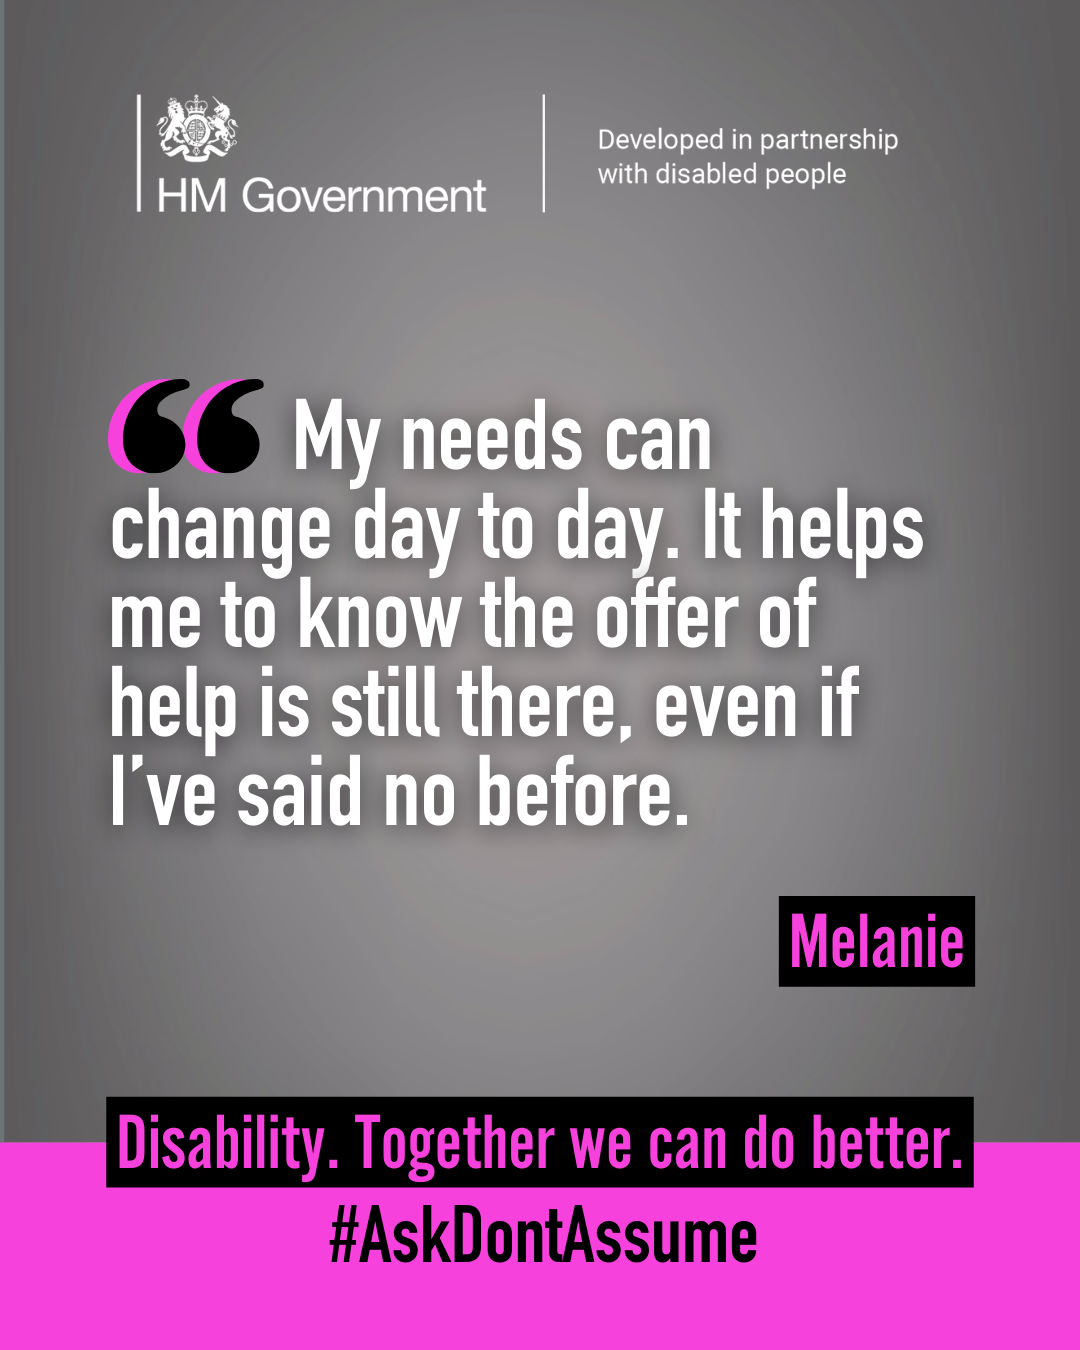 Dark grey portrait graphic with the HM Government logo and “Developed in partnership with disabled people” at the top. A quote from Melanie reads: “My needs can change day to day. It helps me to know the offer of help is still there, even if I’ve said no before”. At the bottom of the graphic it reads: “Disability. Together we can do better. #AskDontAssume”